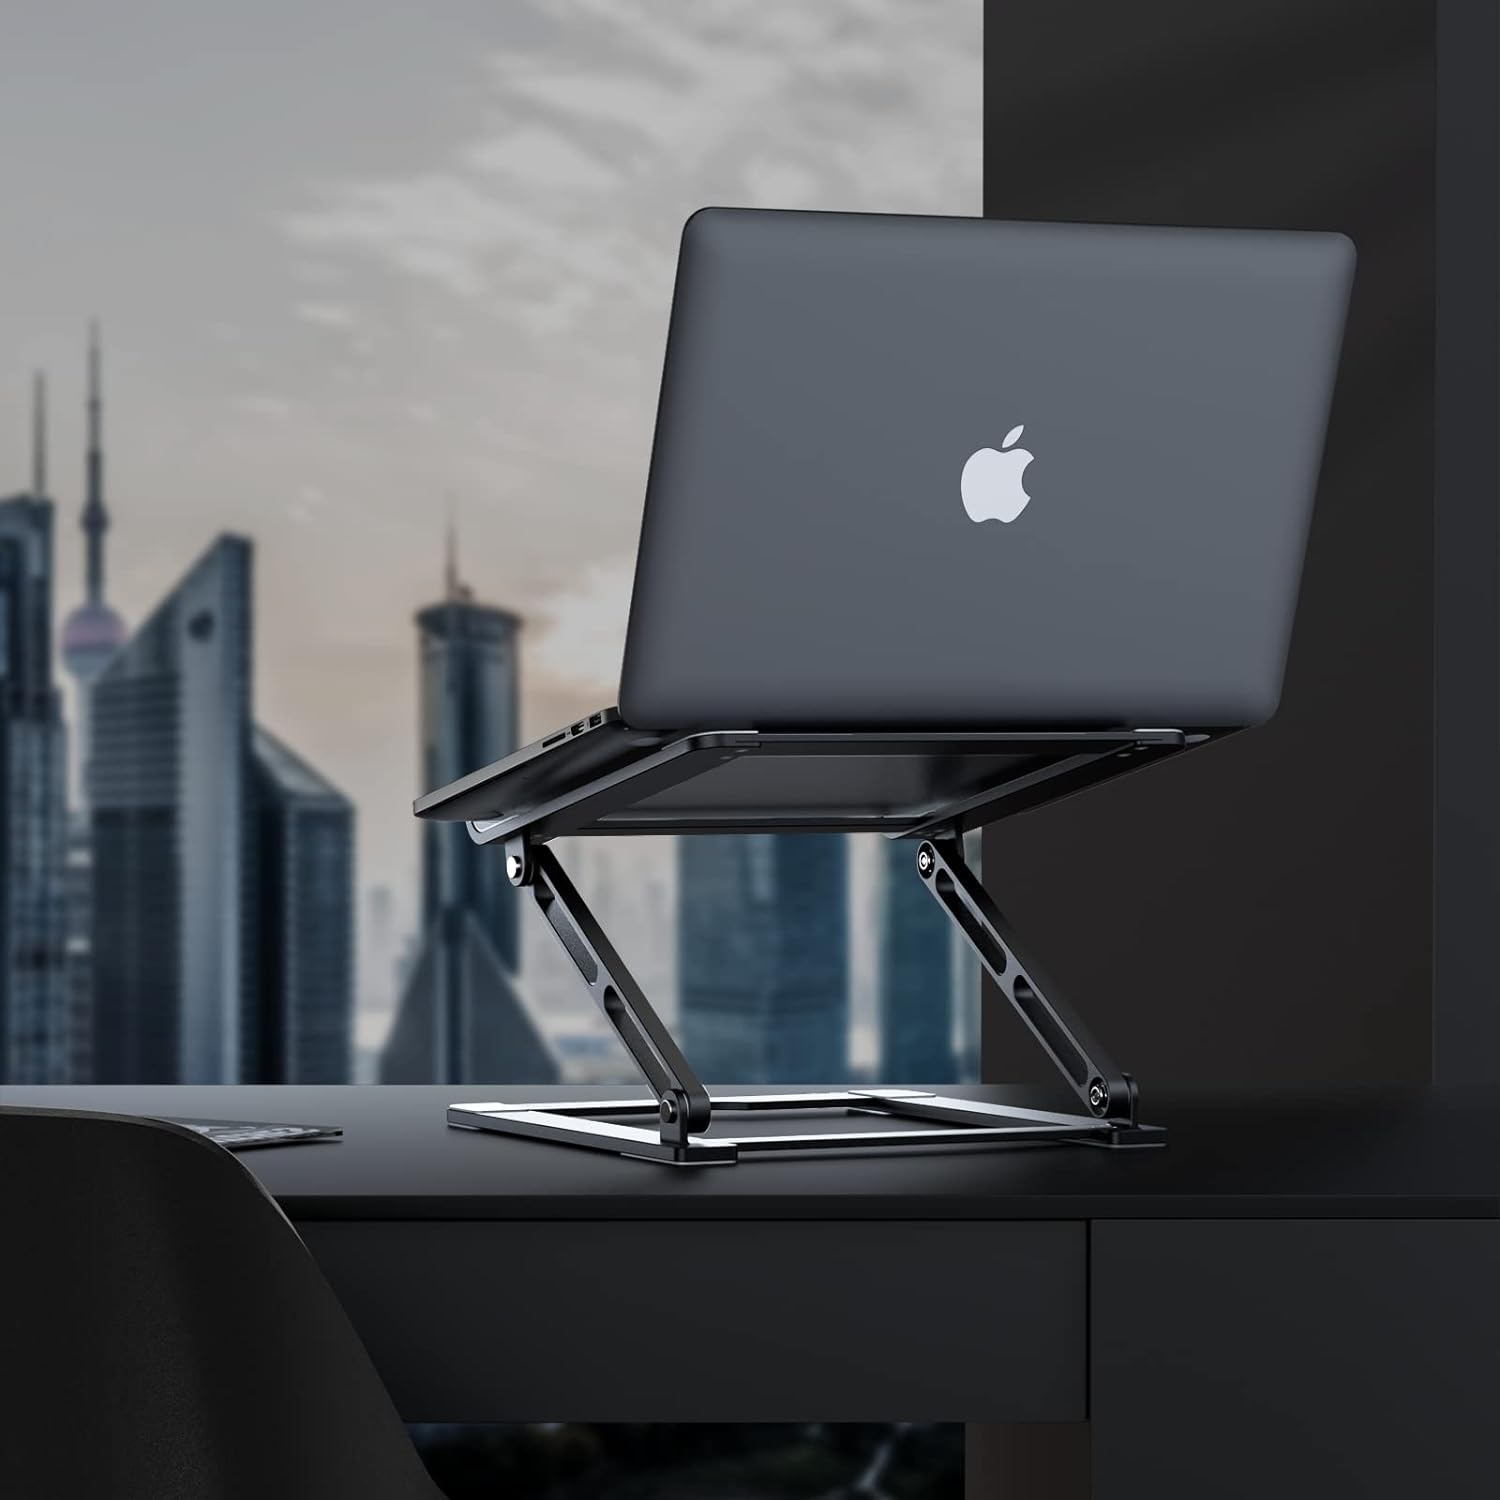 Laptop Stand for Desk, Adjustable Laptop Stand Holder Portable Laptop Riser with Multi-Angle Height Adjustable Computer Stand for MacBook Air/Pro and More Notebooks 10-17.3"-Black